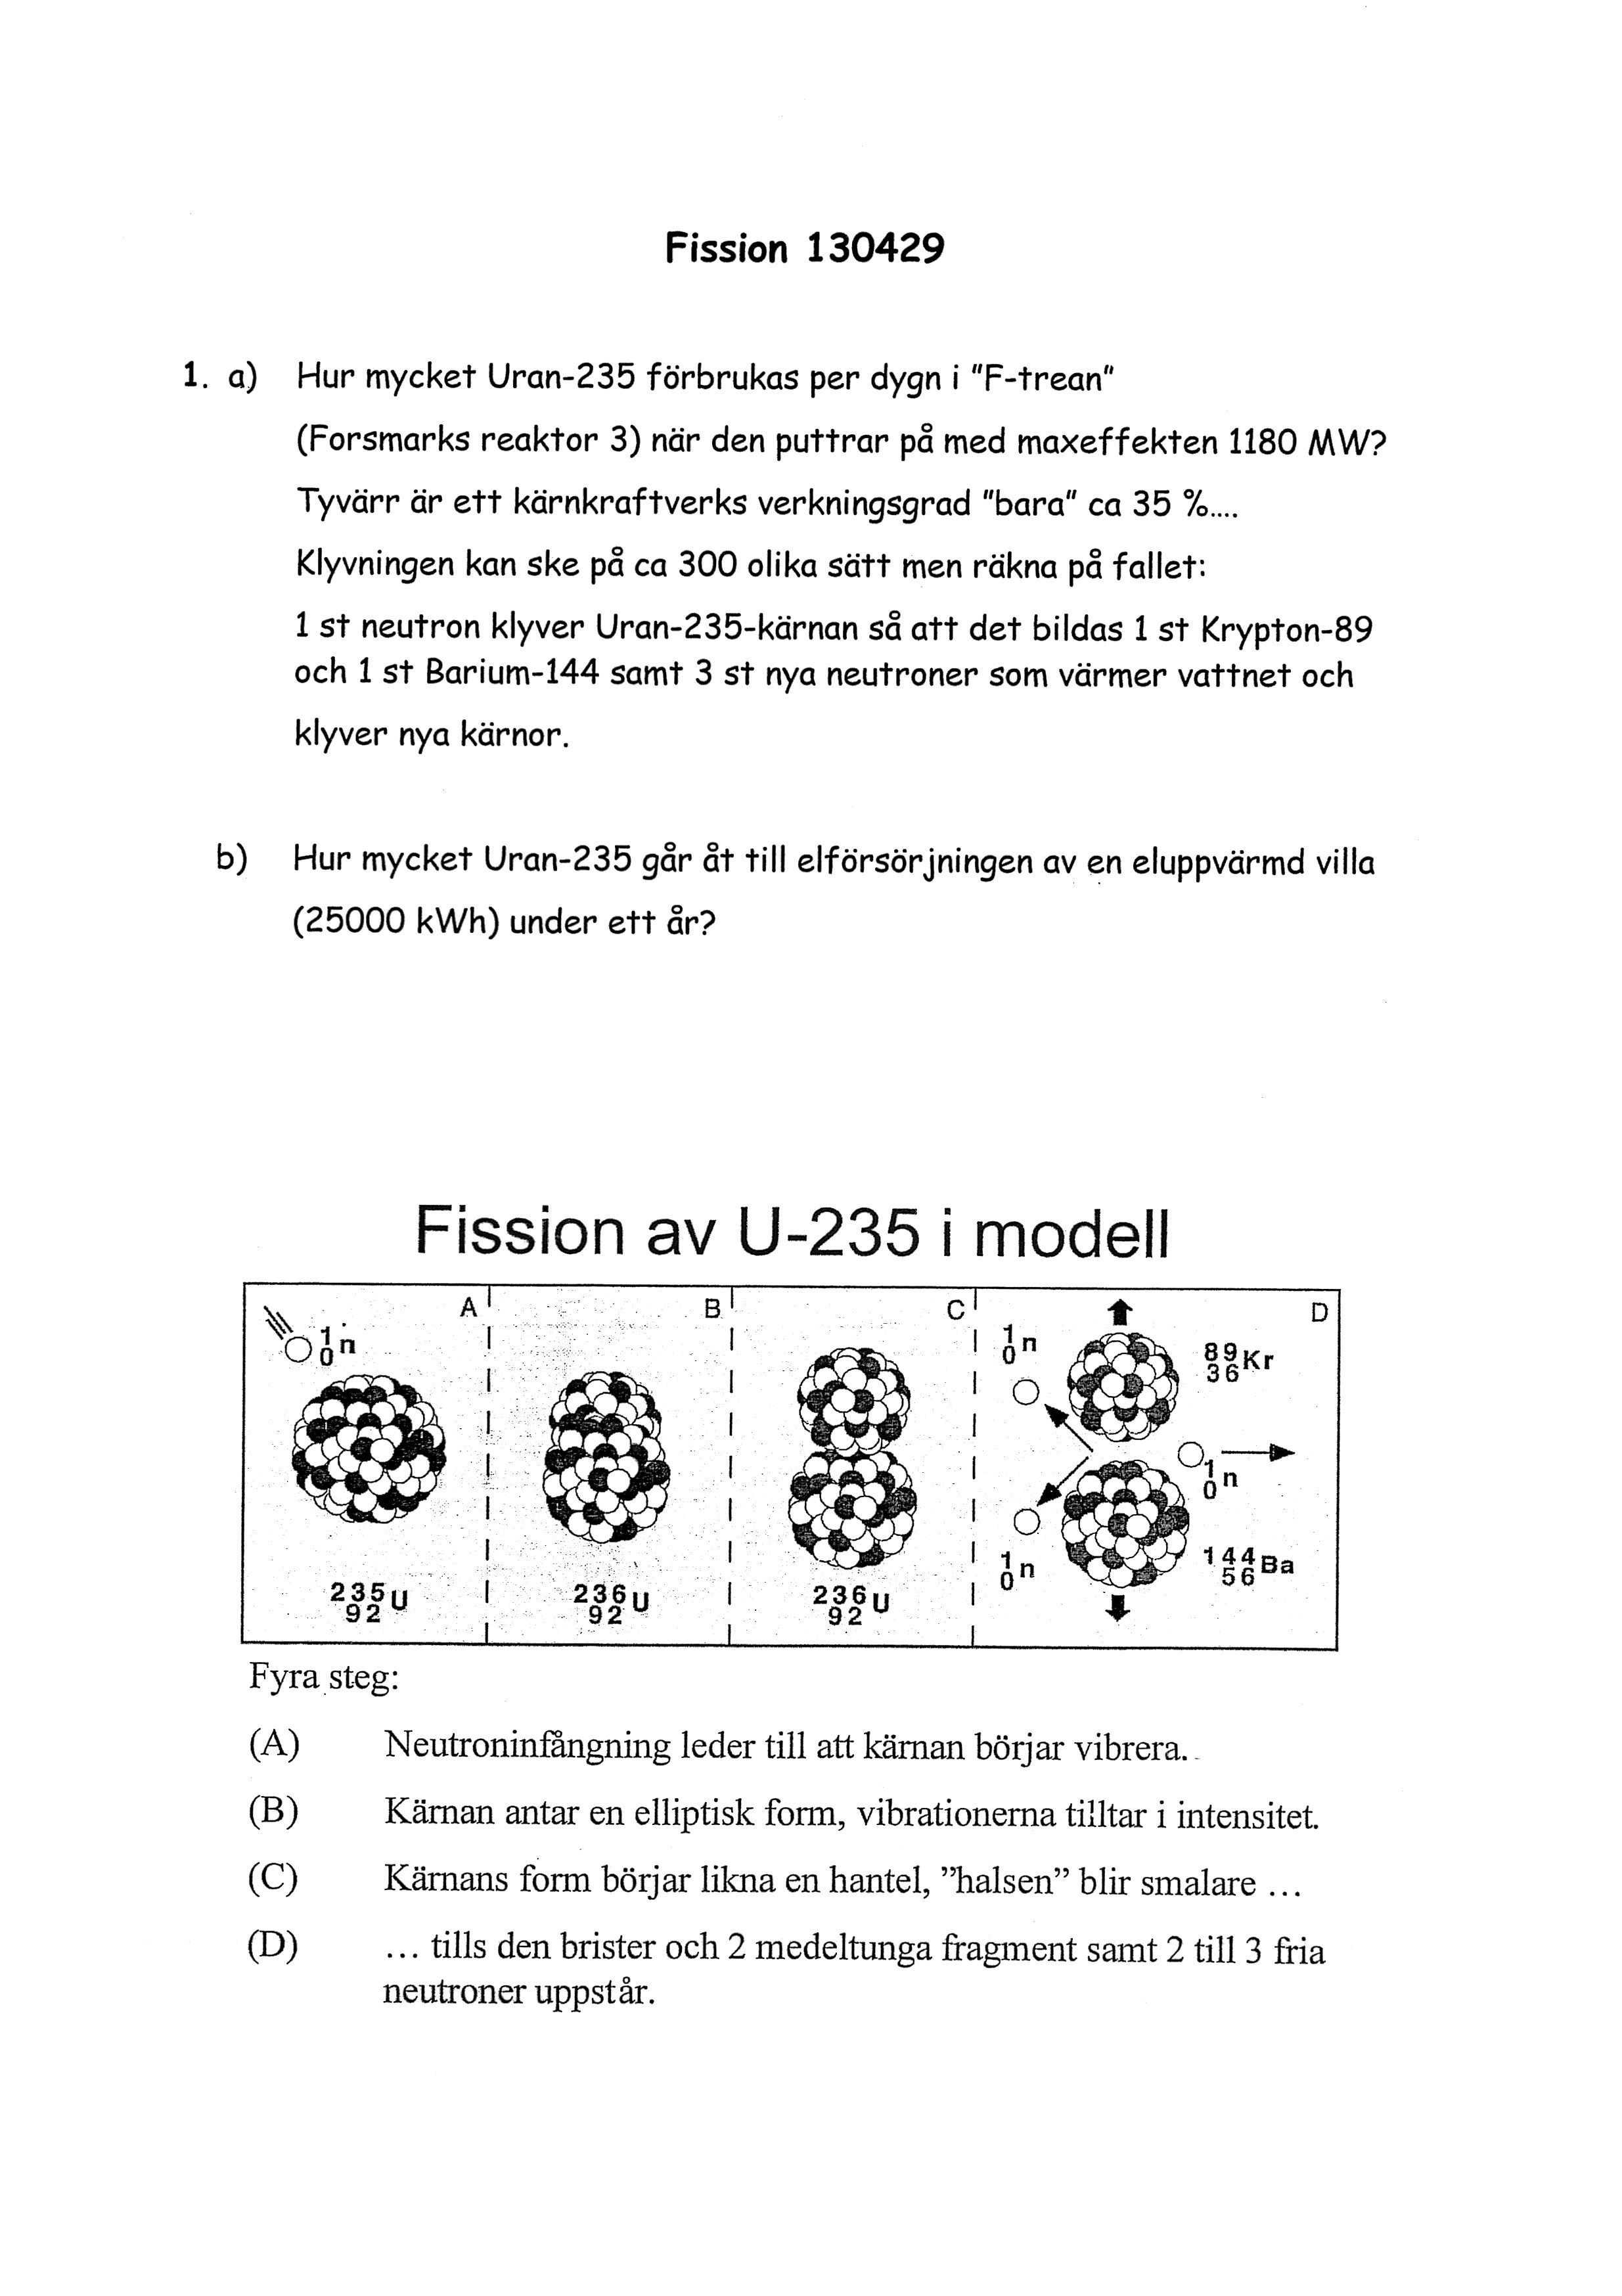 lectureExercise_fysikB_Fission